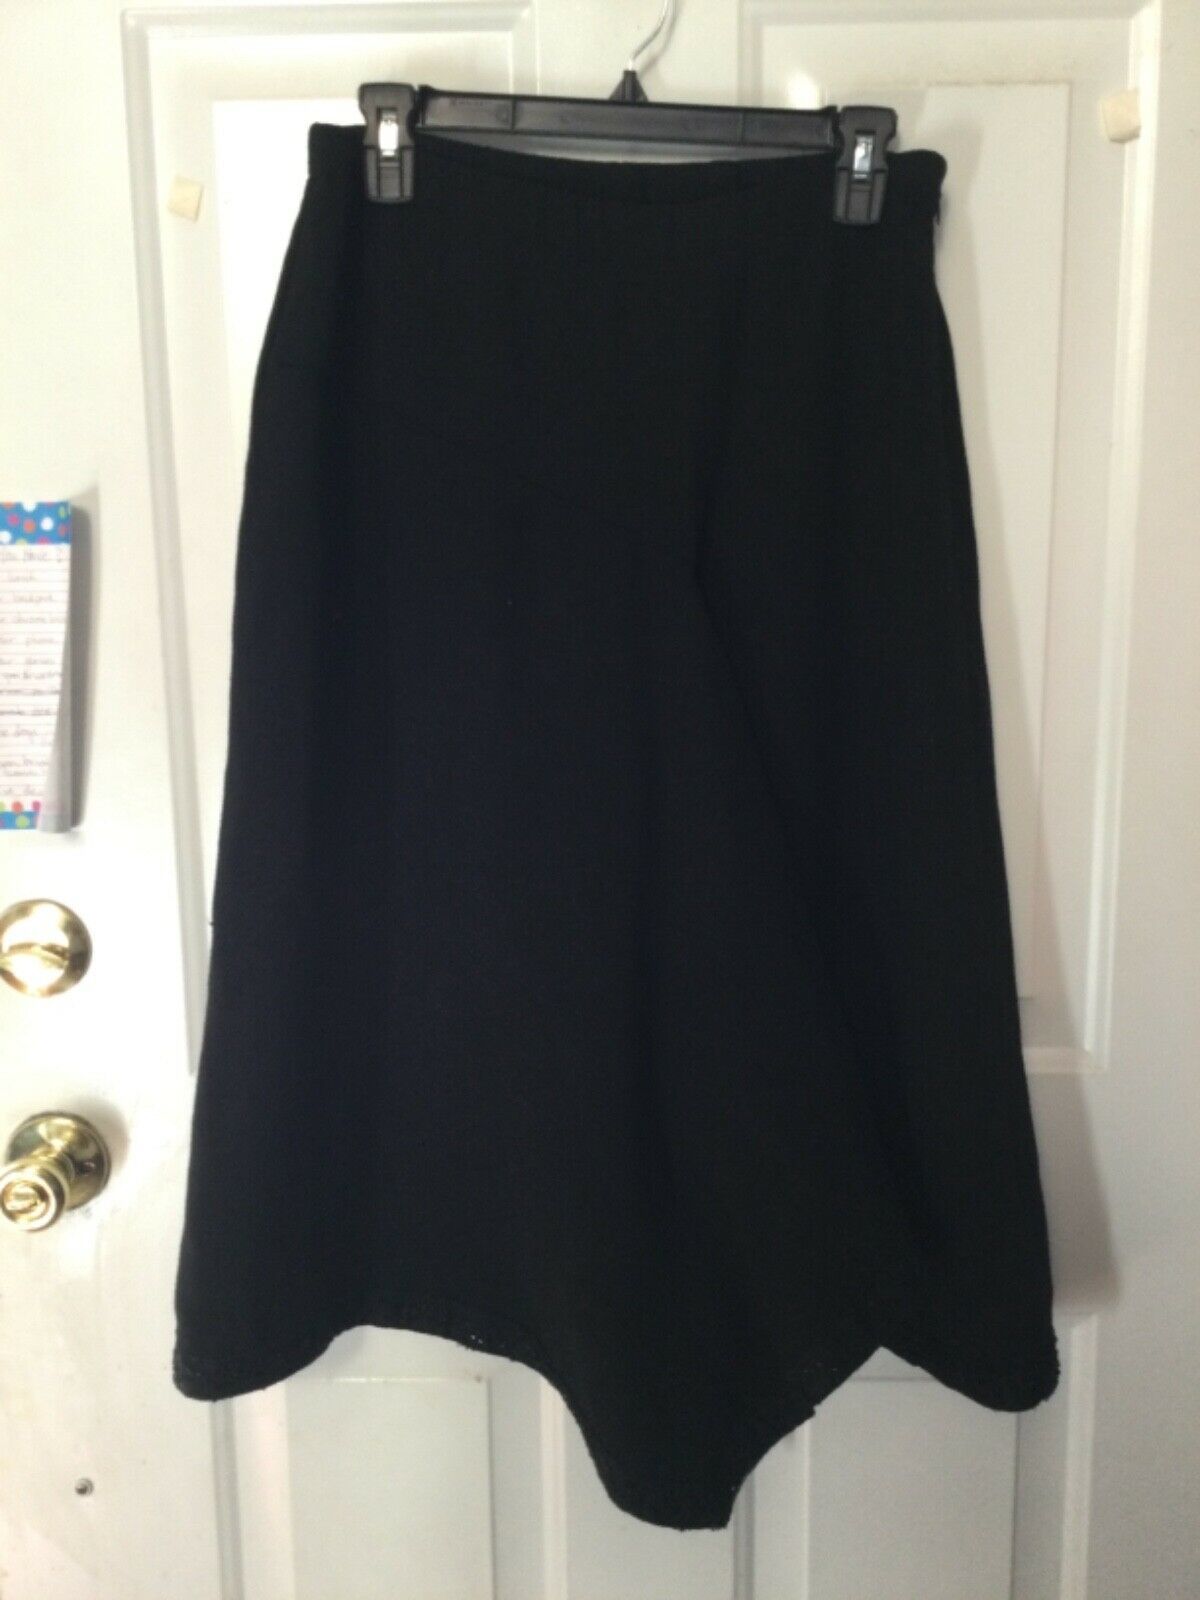 Primary image for Willow elastic waist black crepe skirt with beaded hem and front asymmetric hem